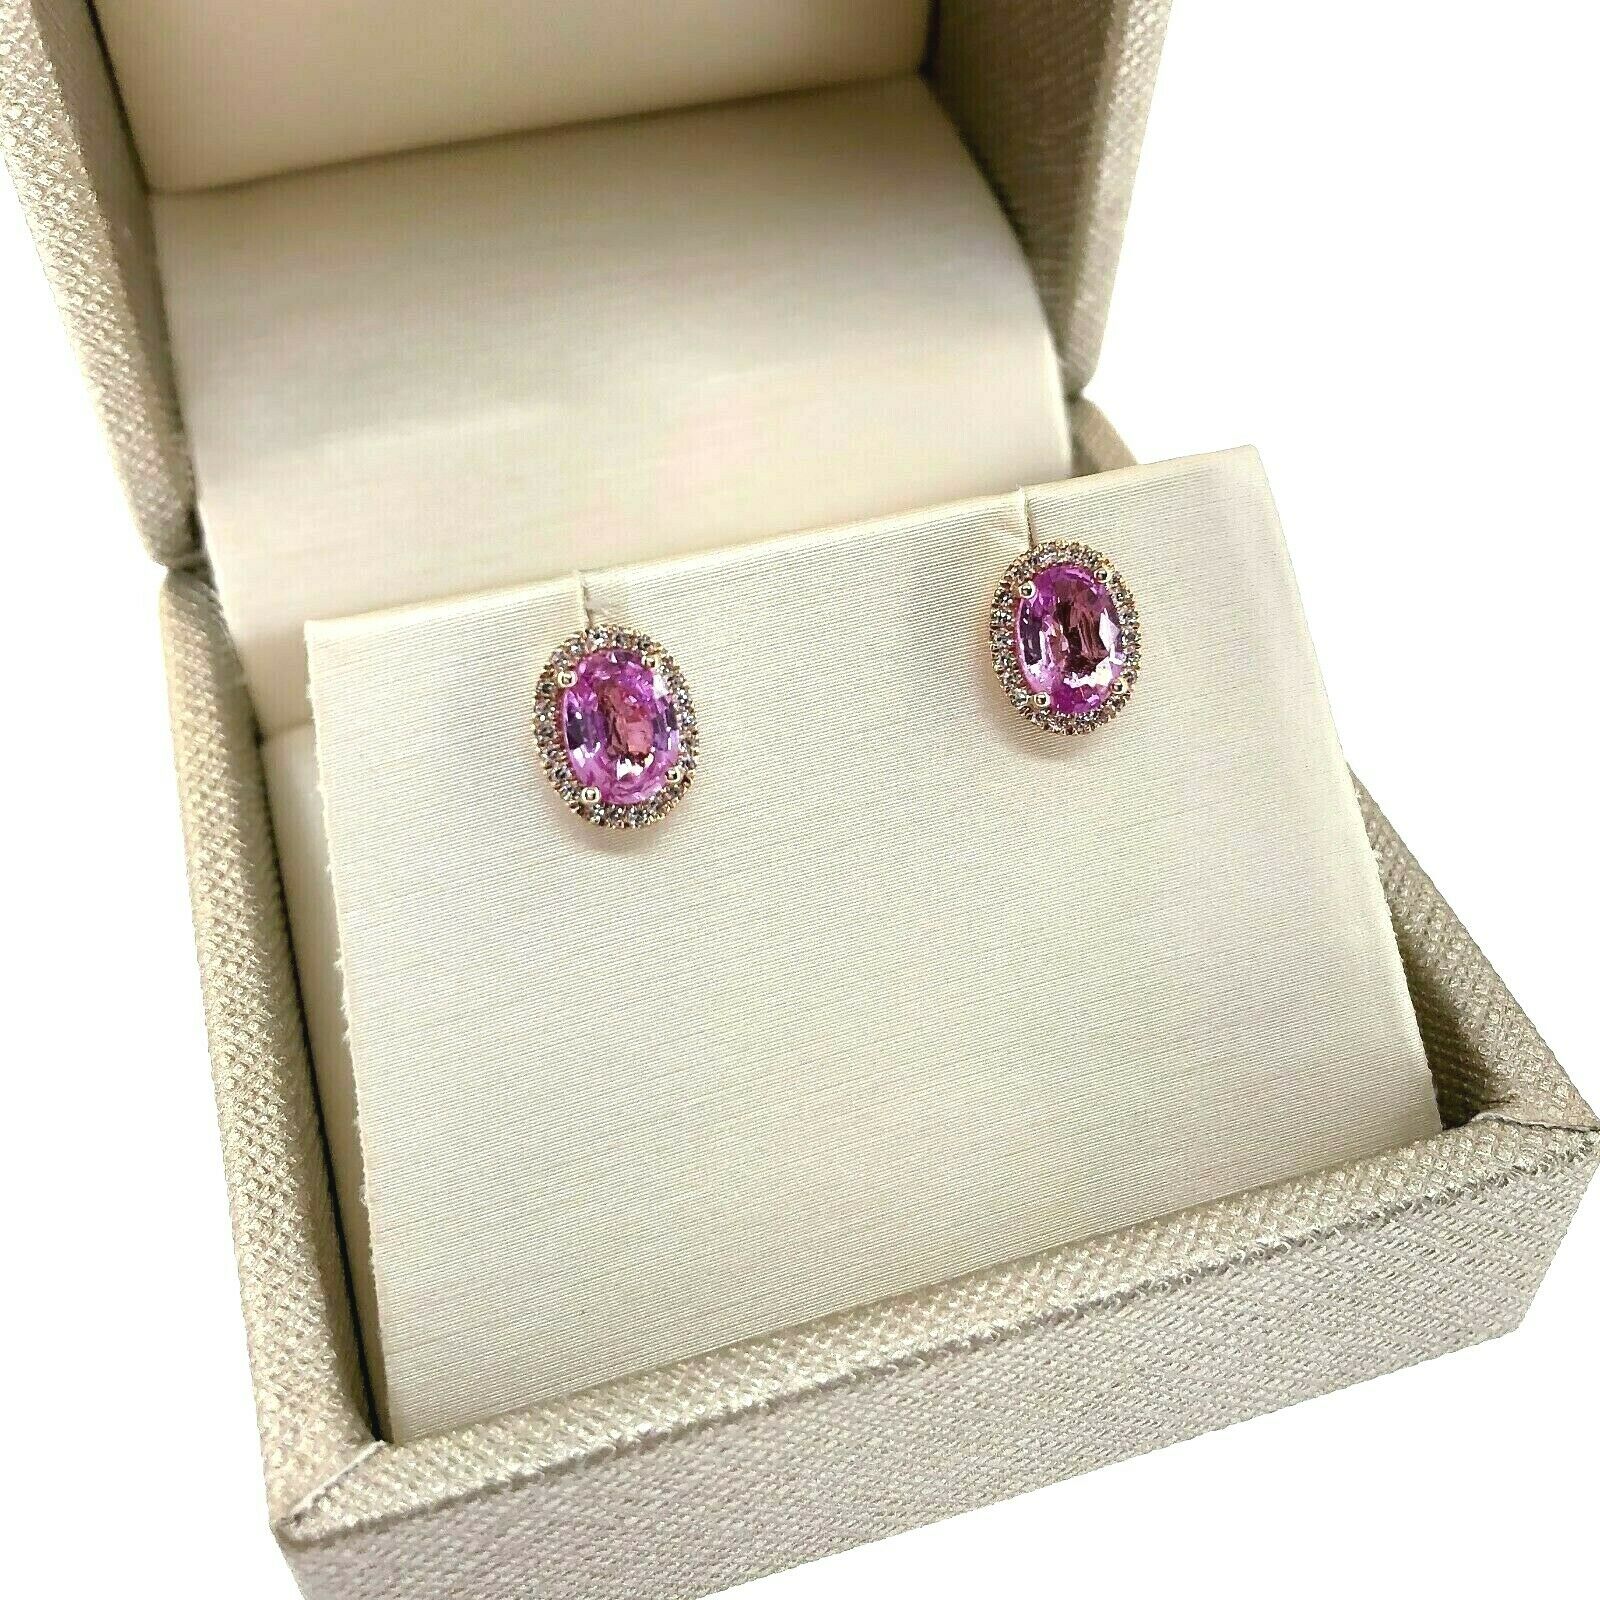 2.02 Carats t.w. Diamond and Pink Sapphire Oval Halo Earrings 14K Rose Gold